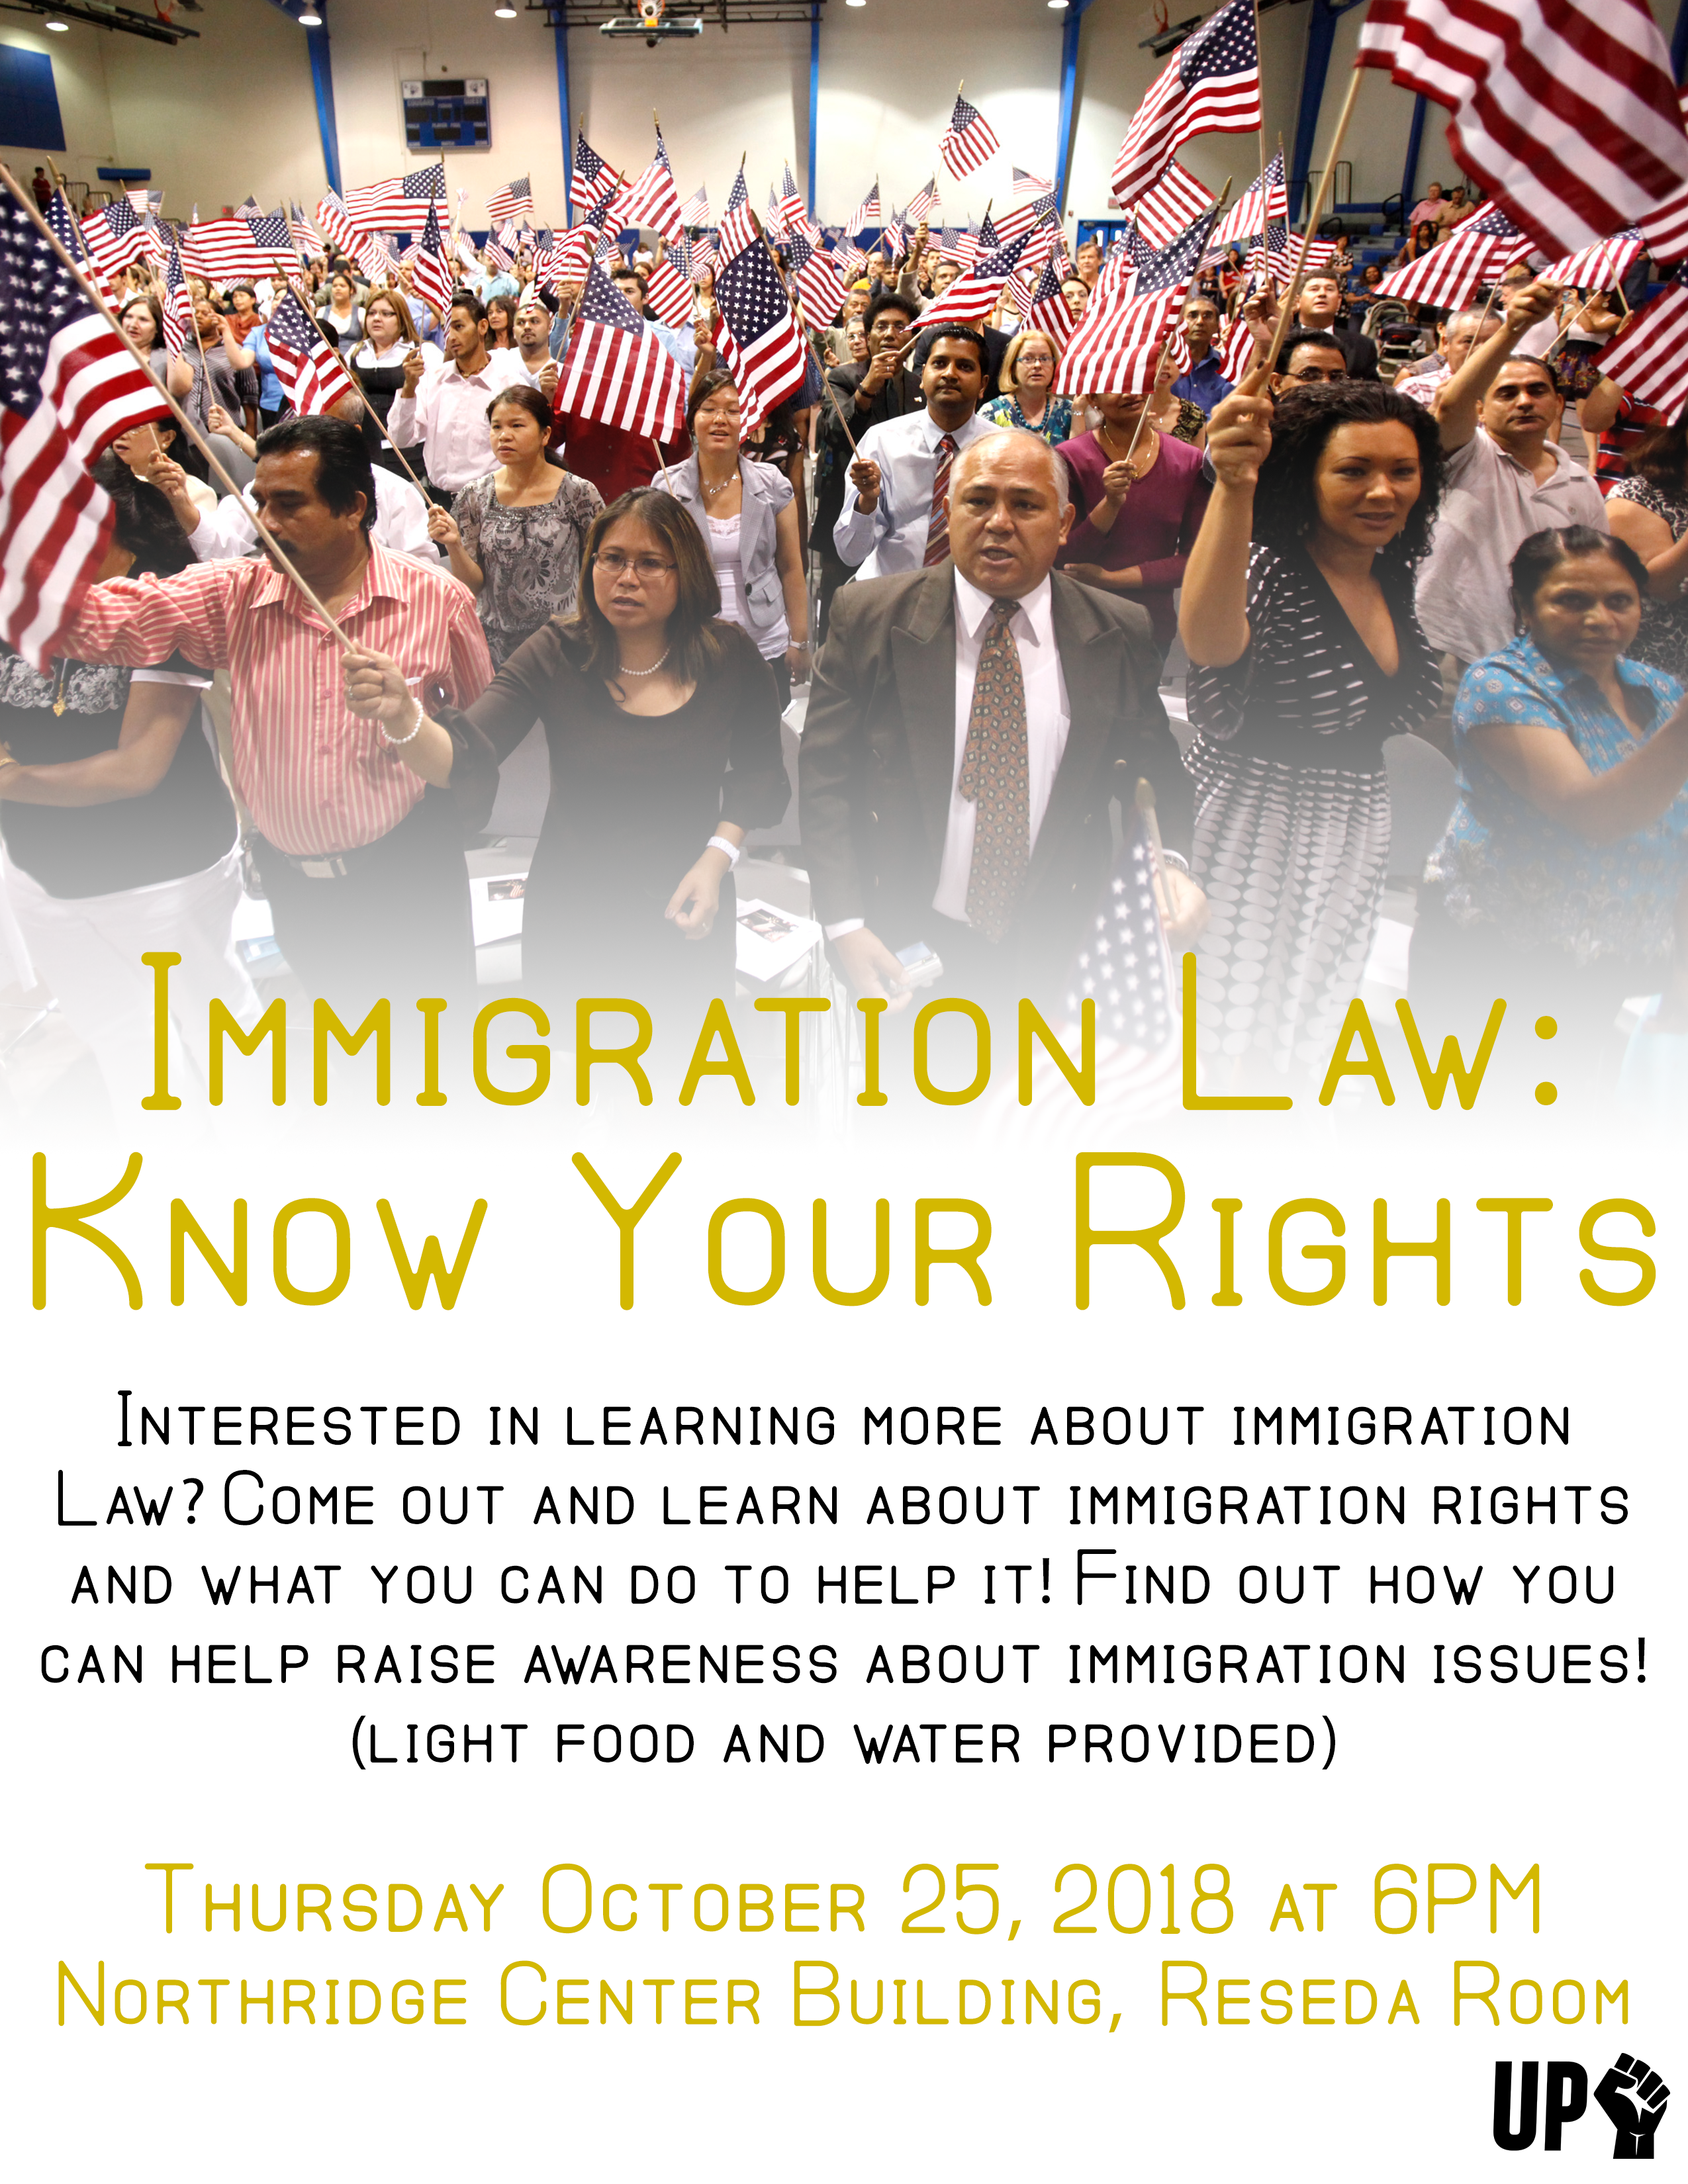 Immigration Law: Know Your Rights -Diverse crowd of people holding American Flags